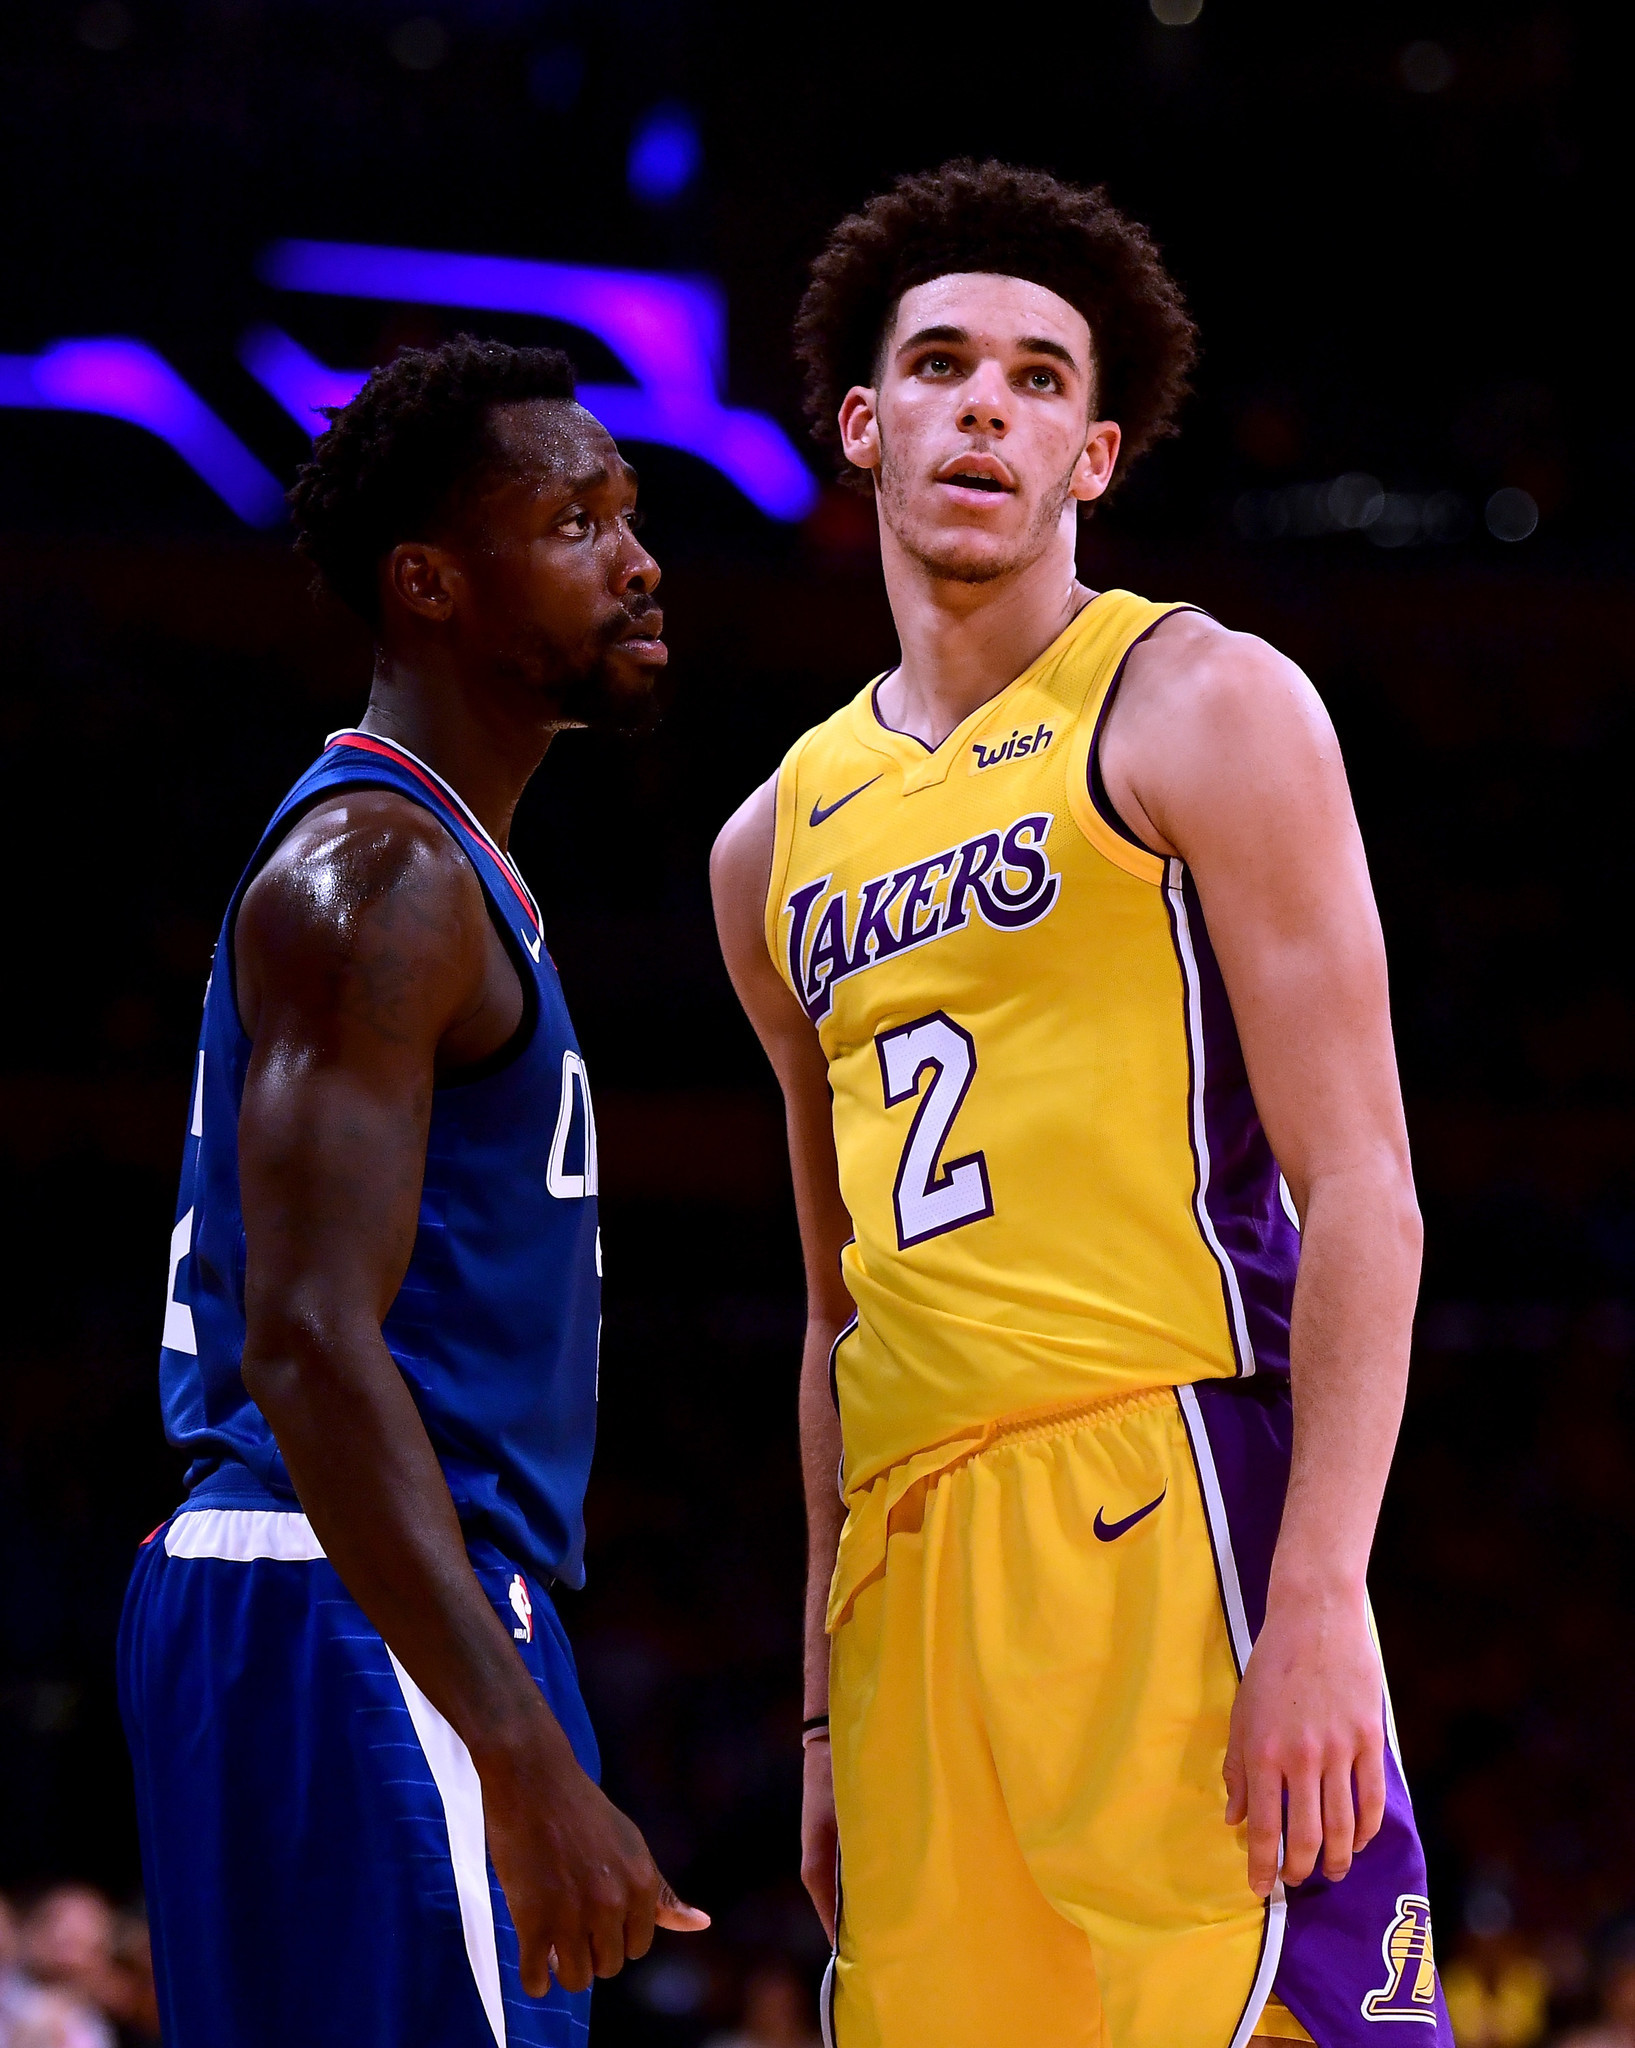 Patrick Beverley shuts down Lonzo Ball, and then stirs up LaVar Ball - Chicago Tribune